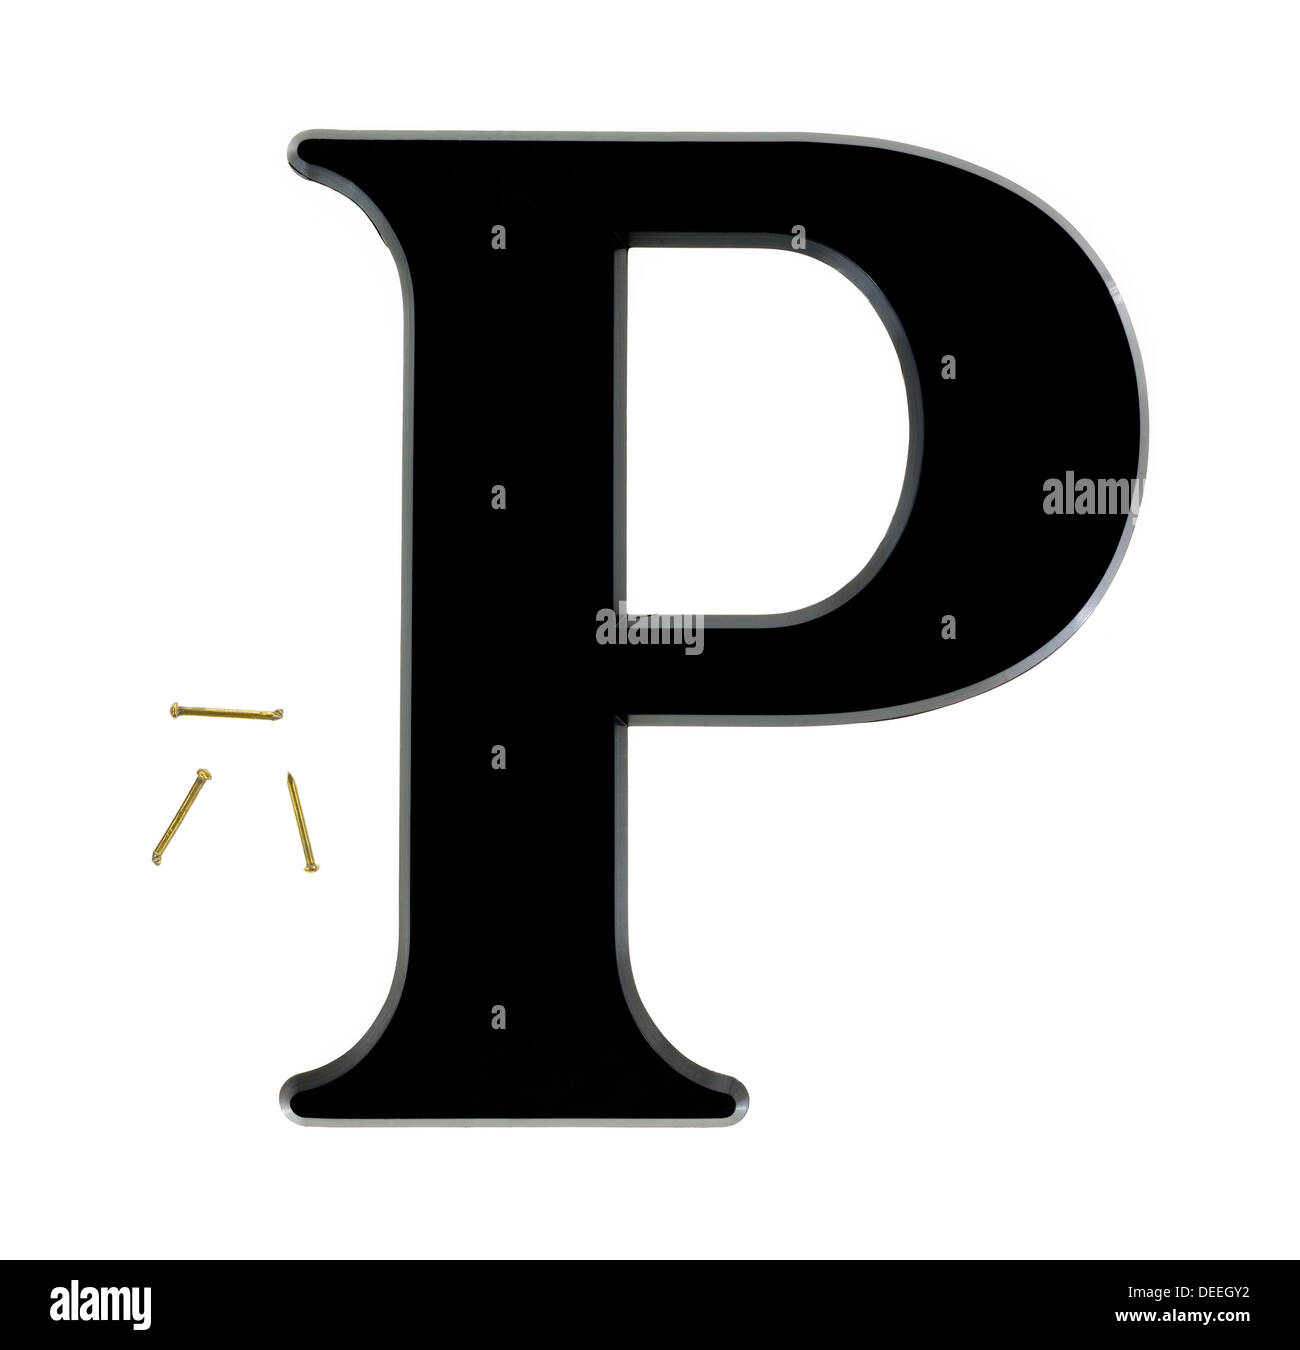 A large black house letter P with three small brass nails for mounting on a white background. Stock Photo